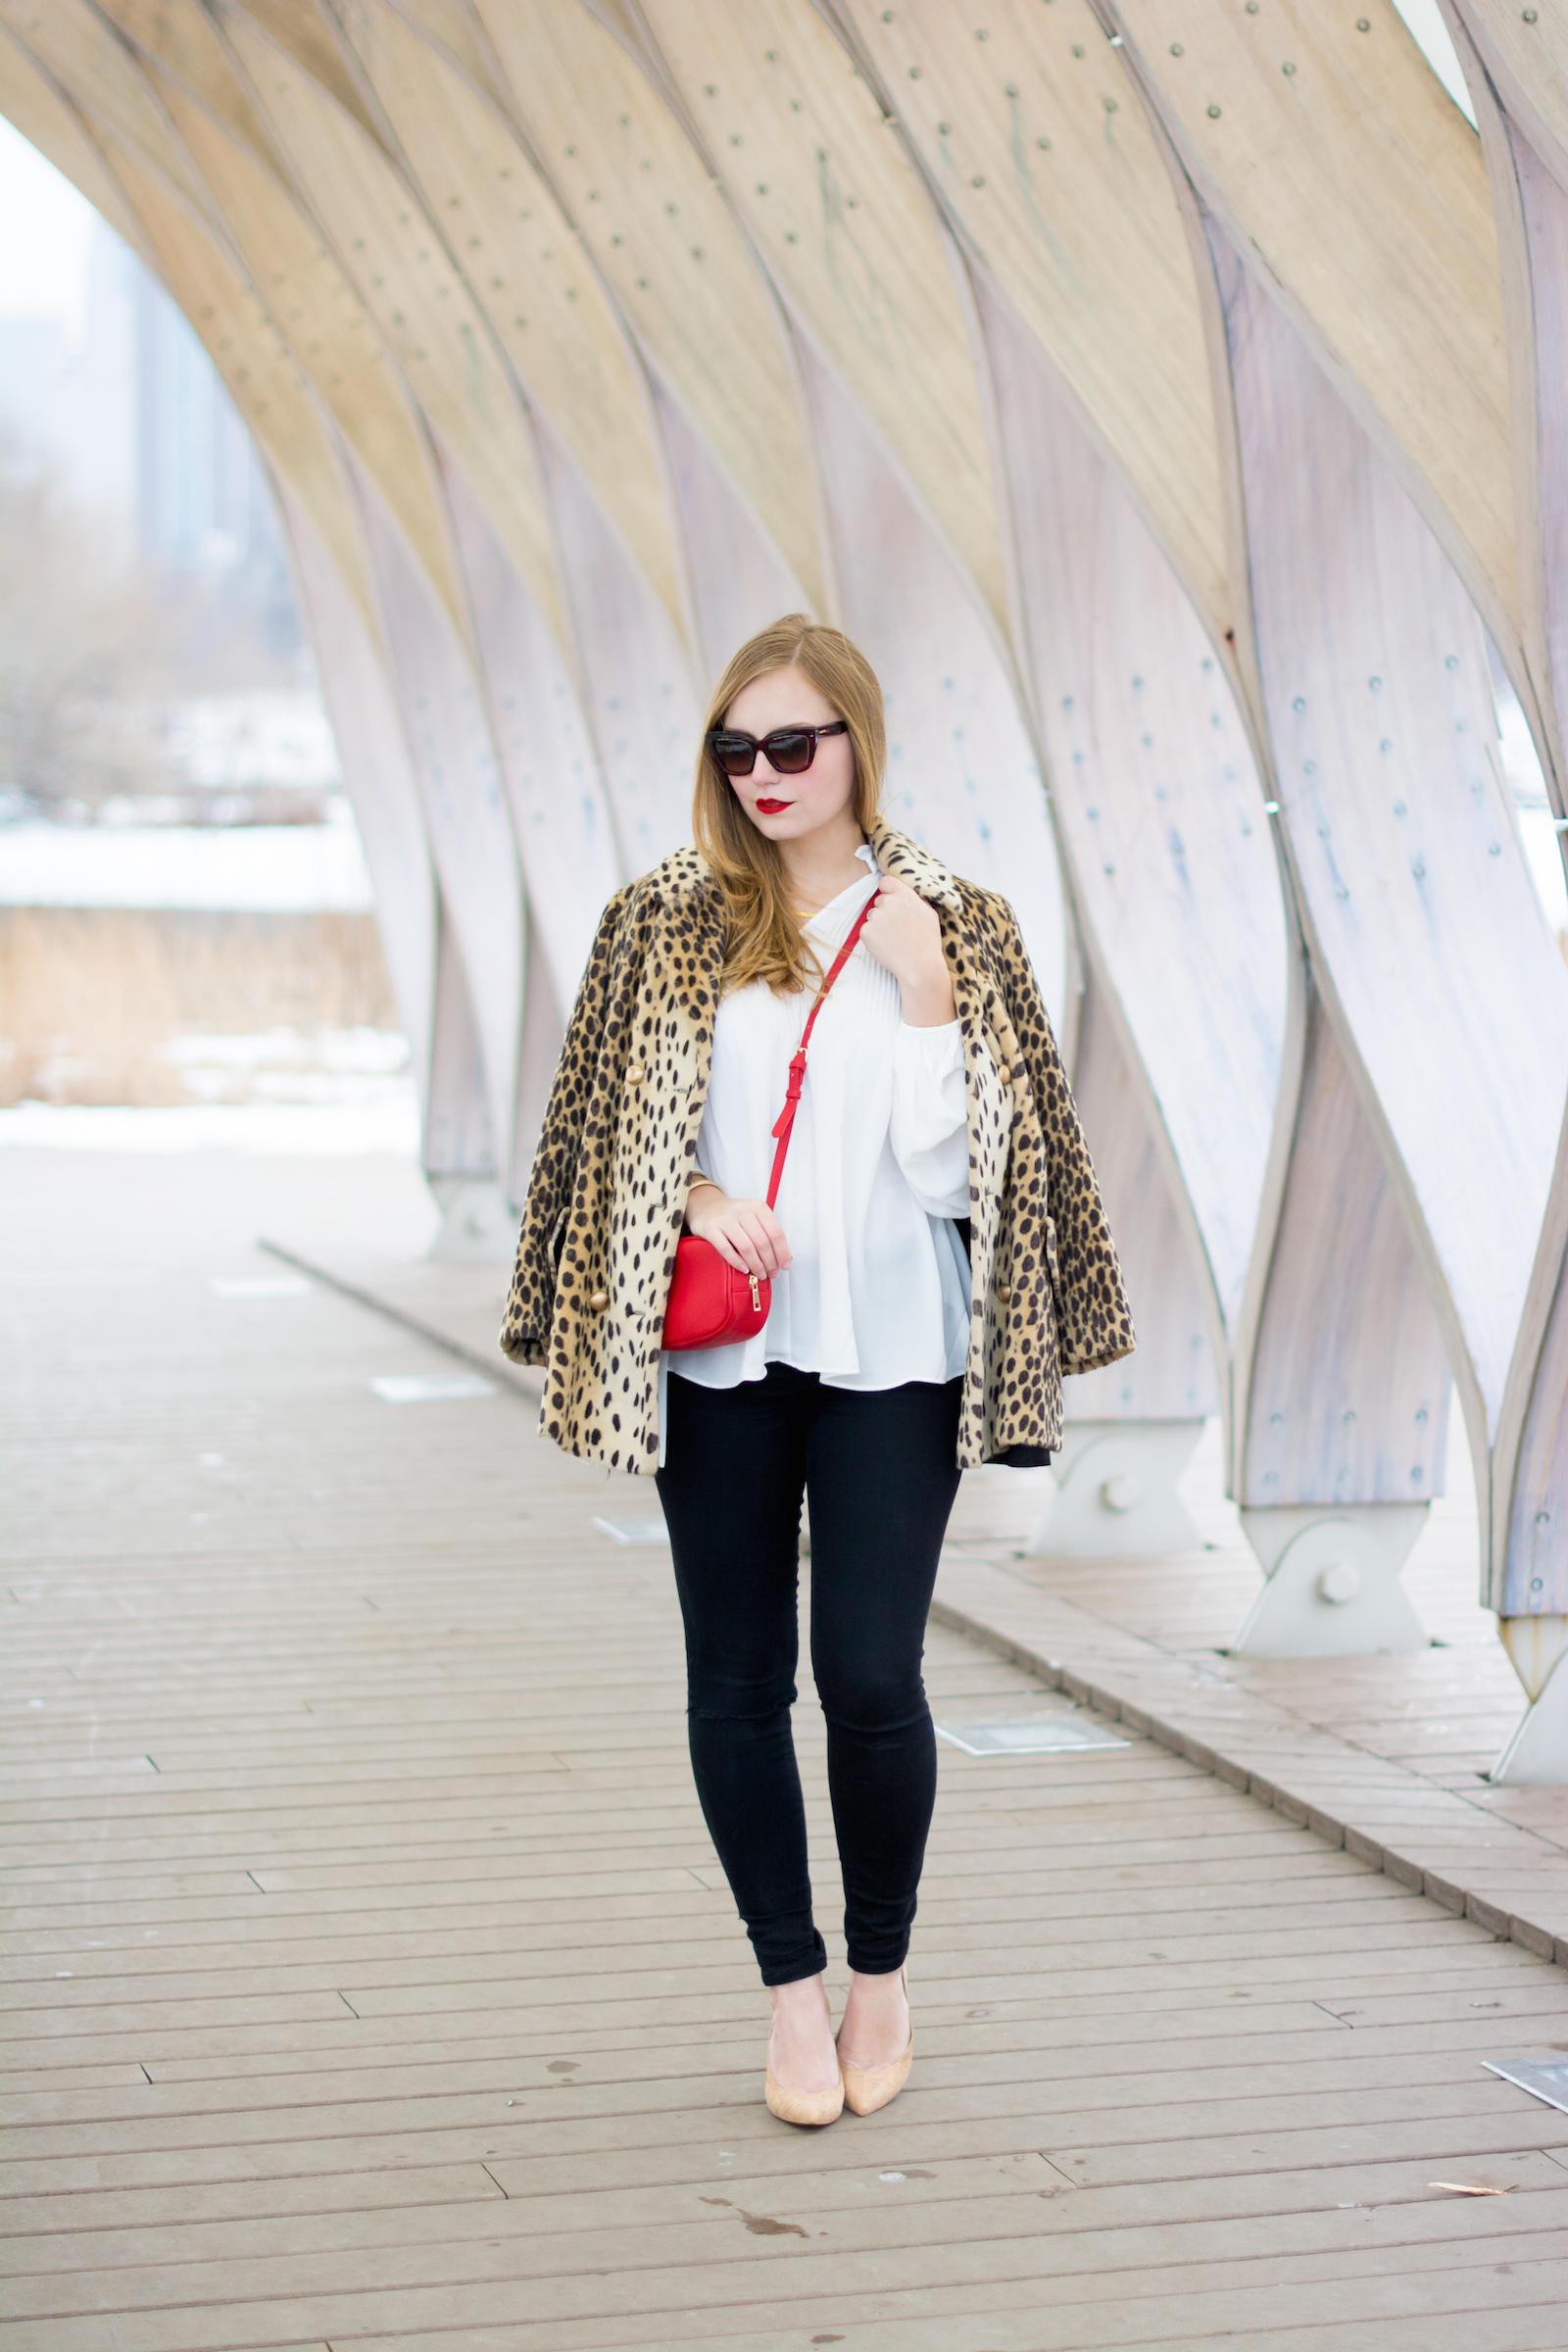 Vintage Winter Style Chicago Blogger